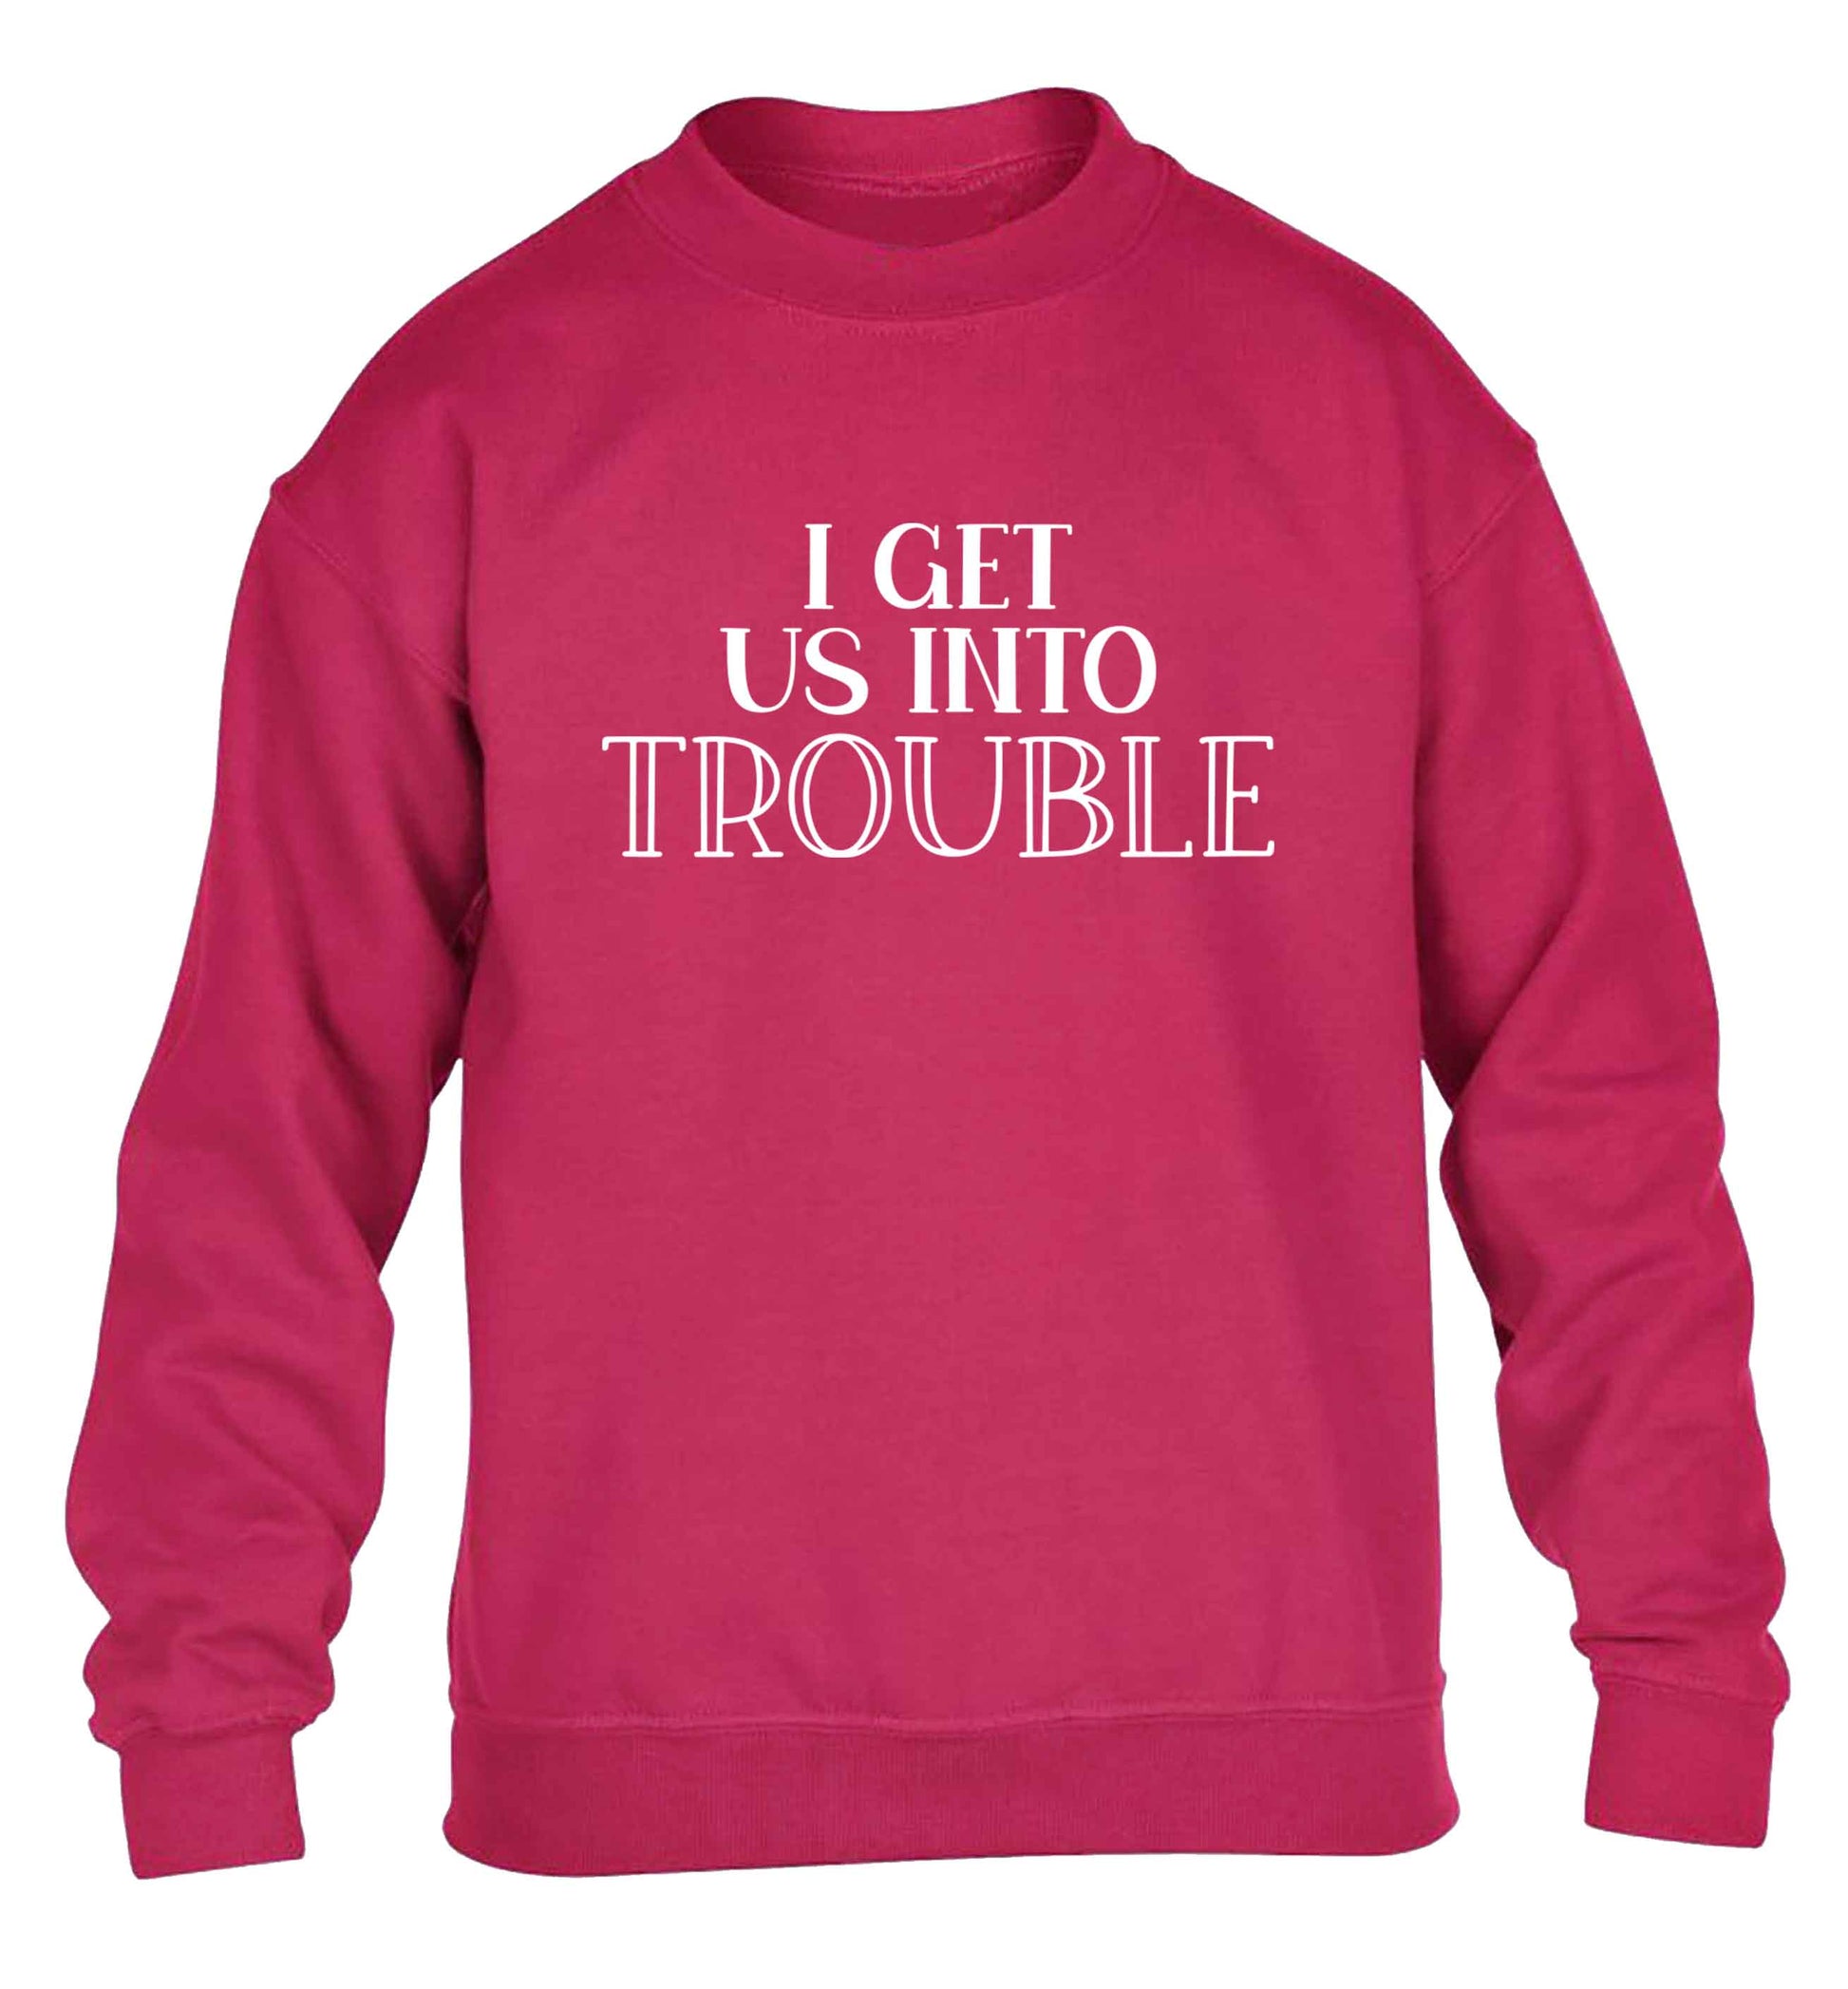 I get us into trouble children's pink sweater 12-13 Years